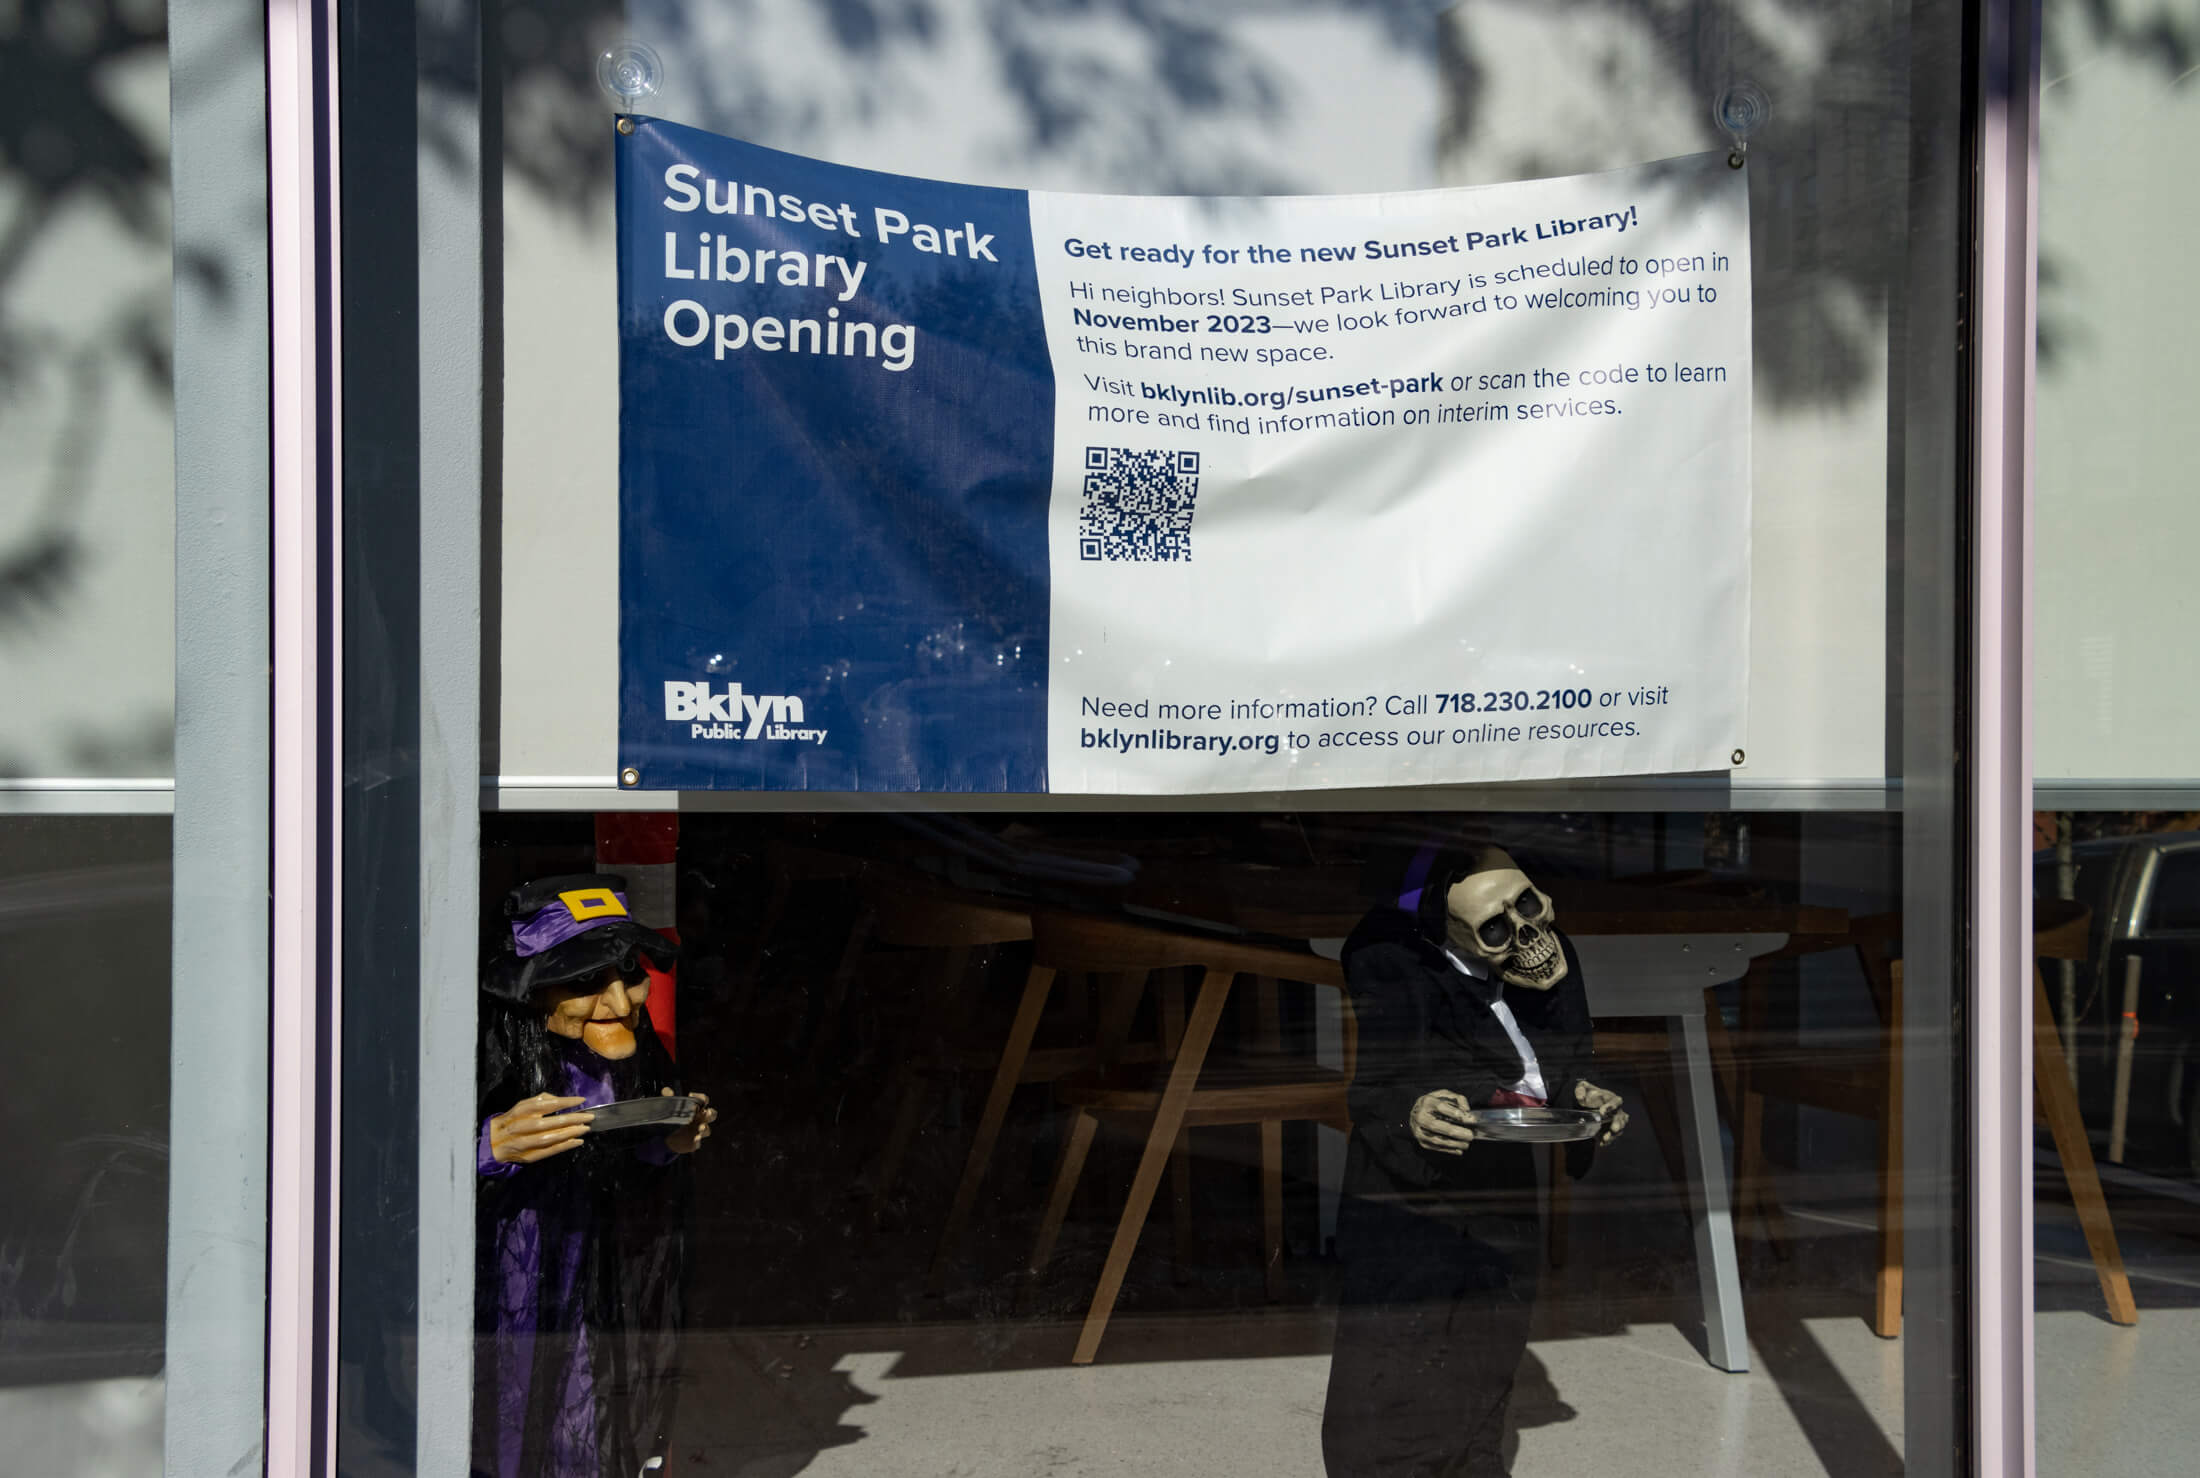 a banner noting that the library will be opening in november of 2023